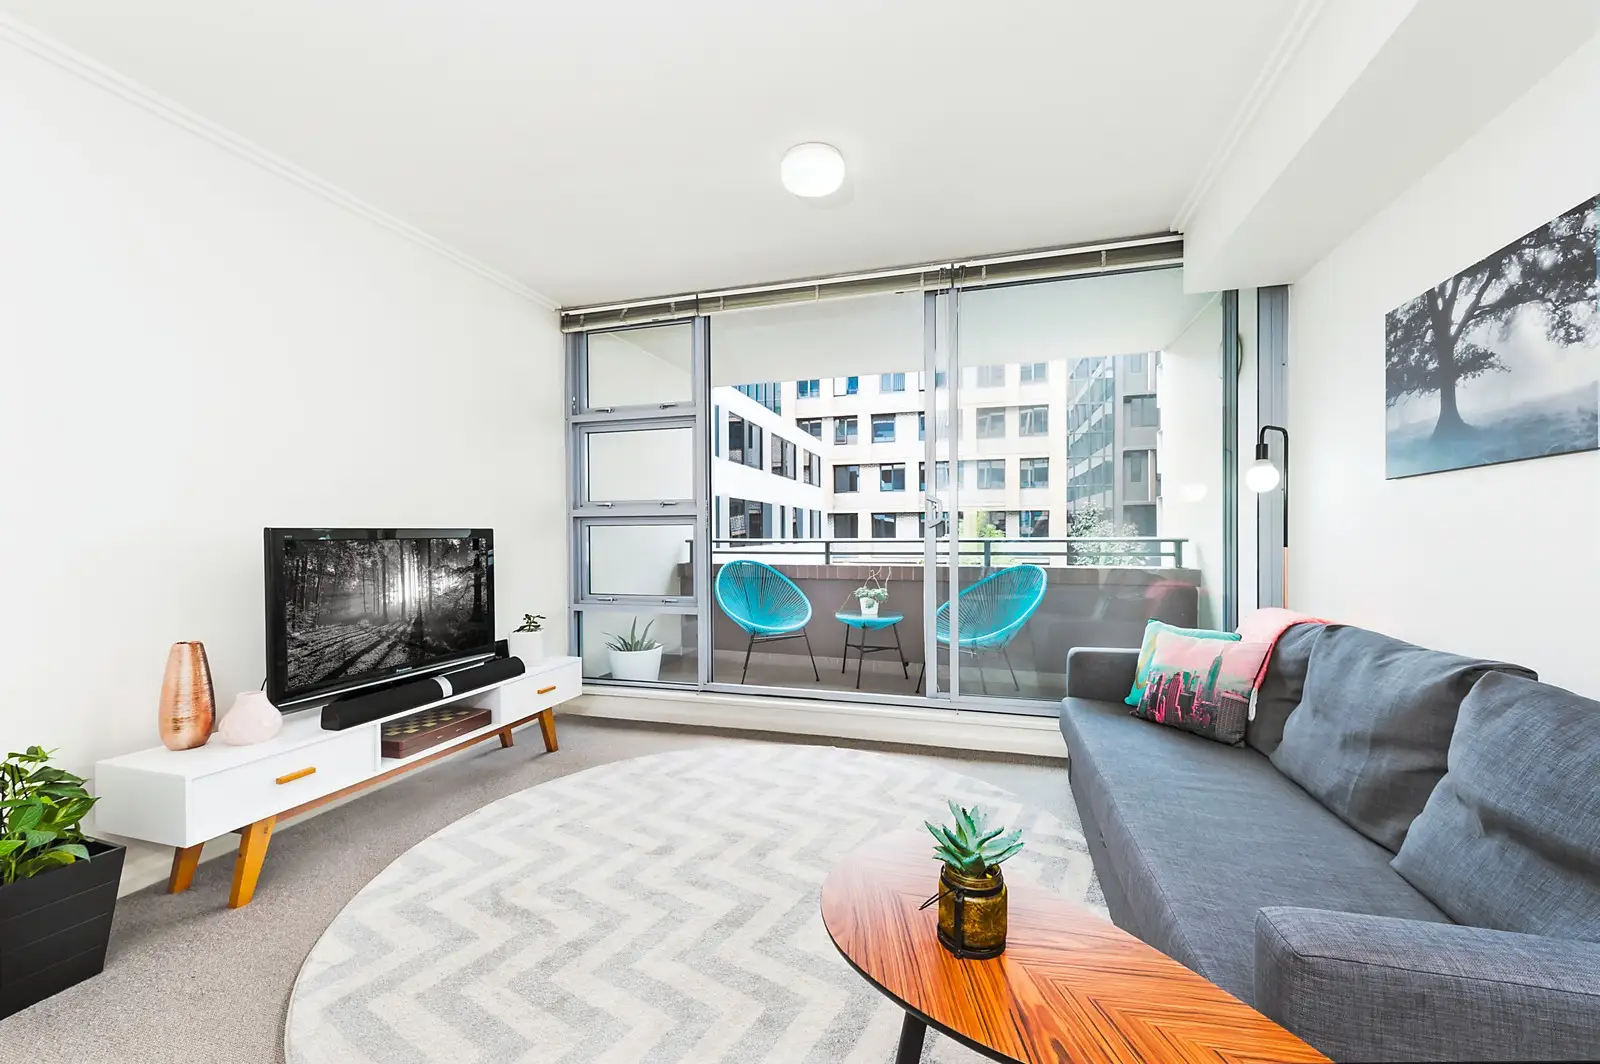 Photo #1: 230/16 Smail Street, Ultimo - Sold by Sydney Sotheby's International Realty